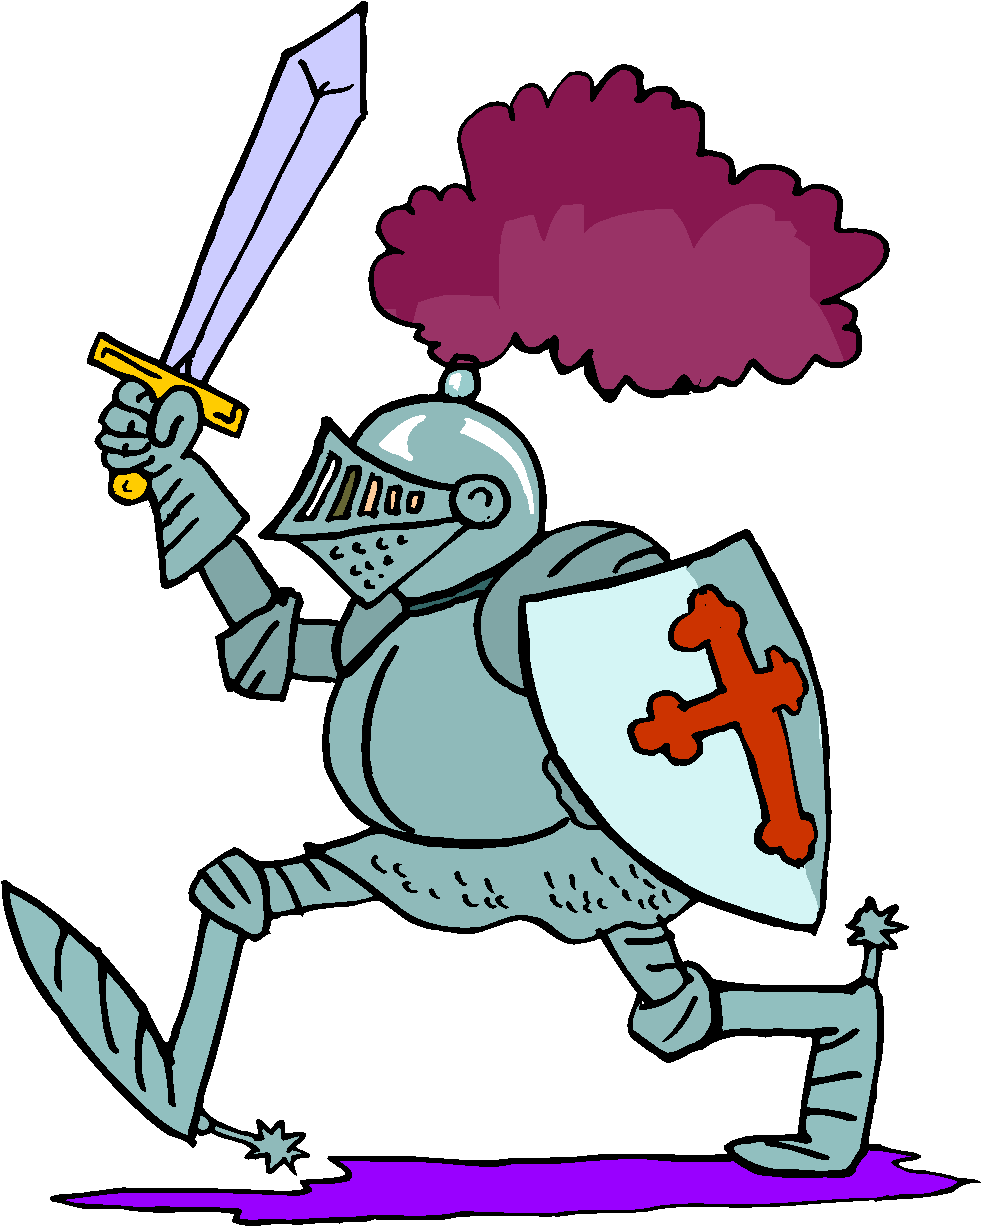 Armor Knight Free Clipart Get This Armor Knight Free Clipart